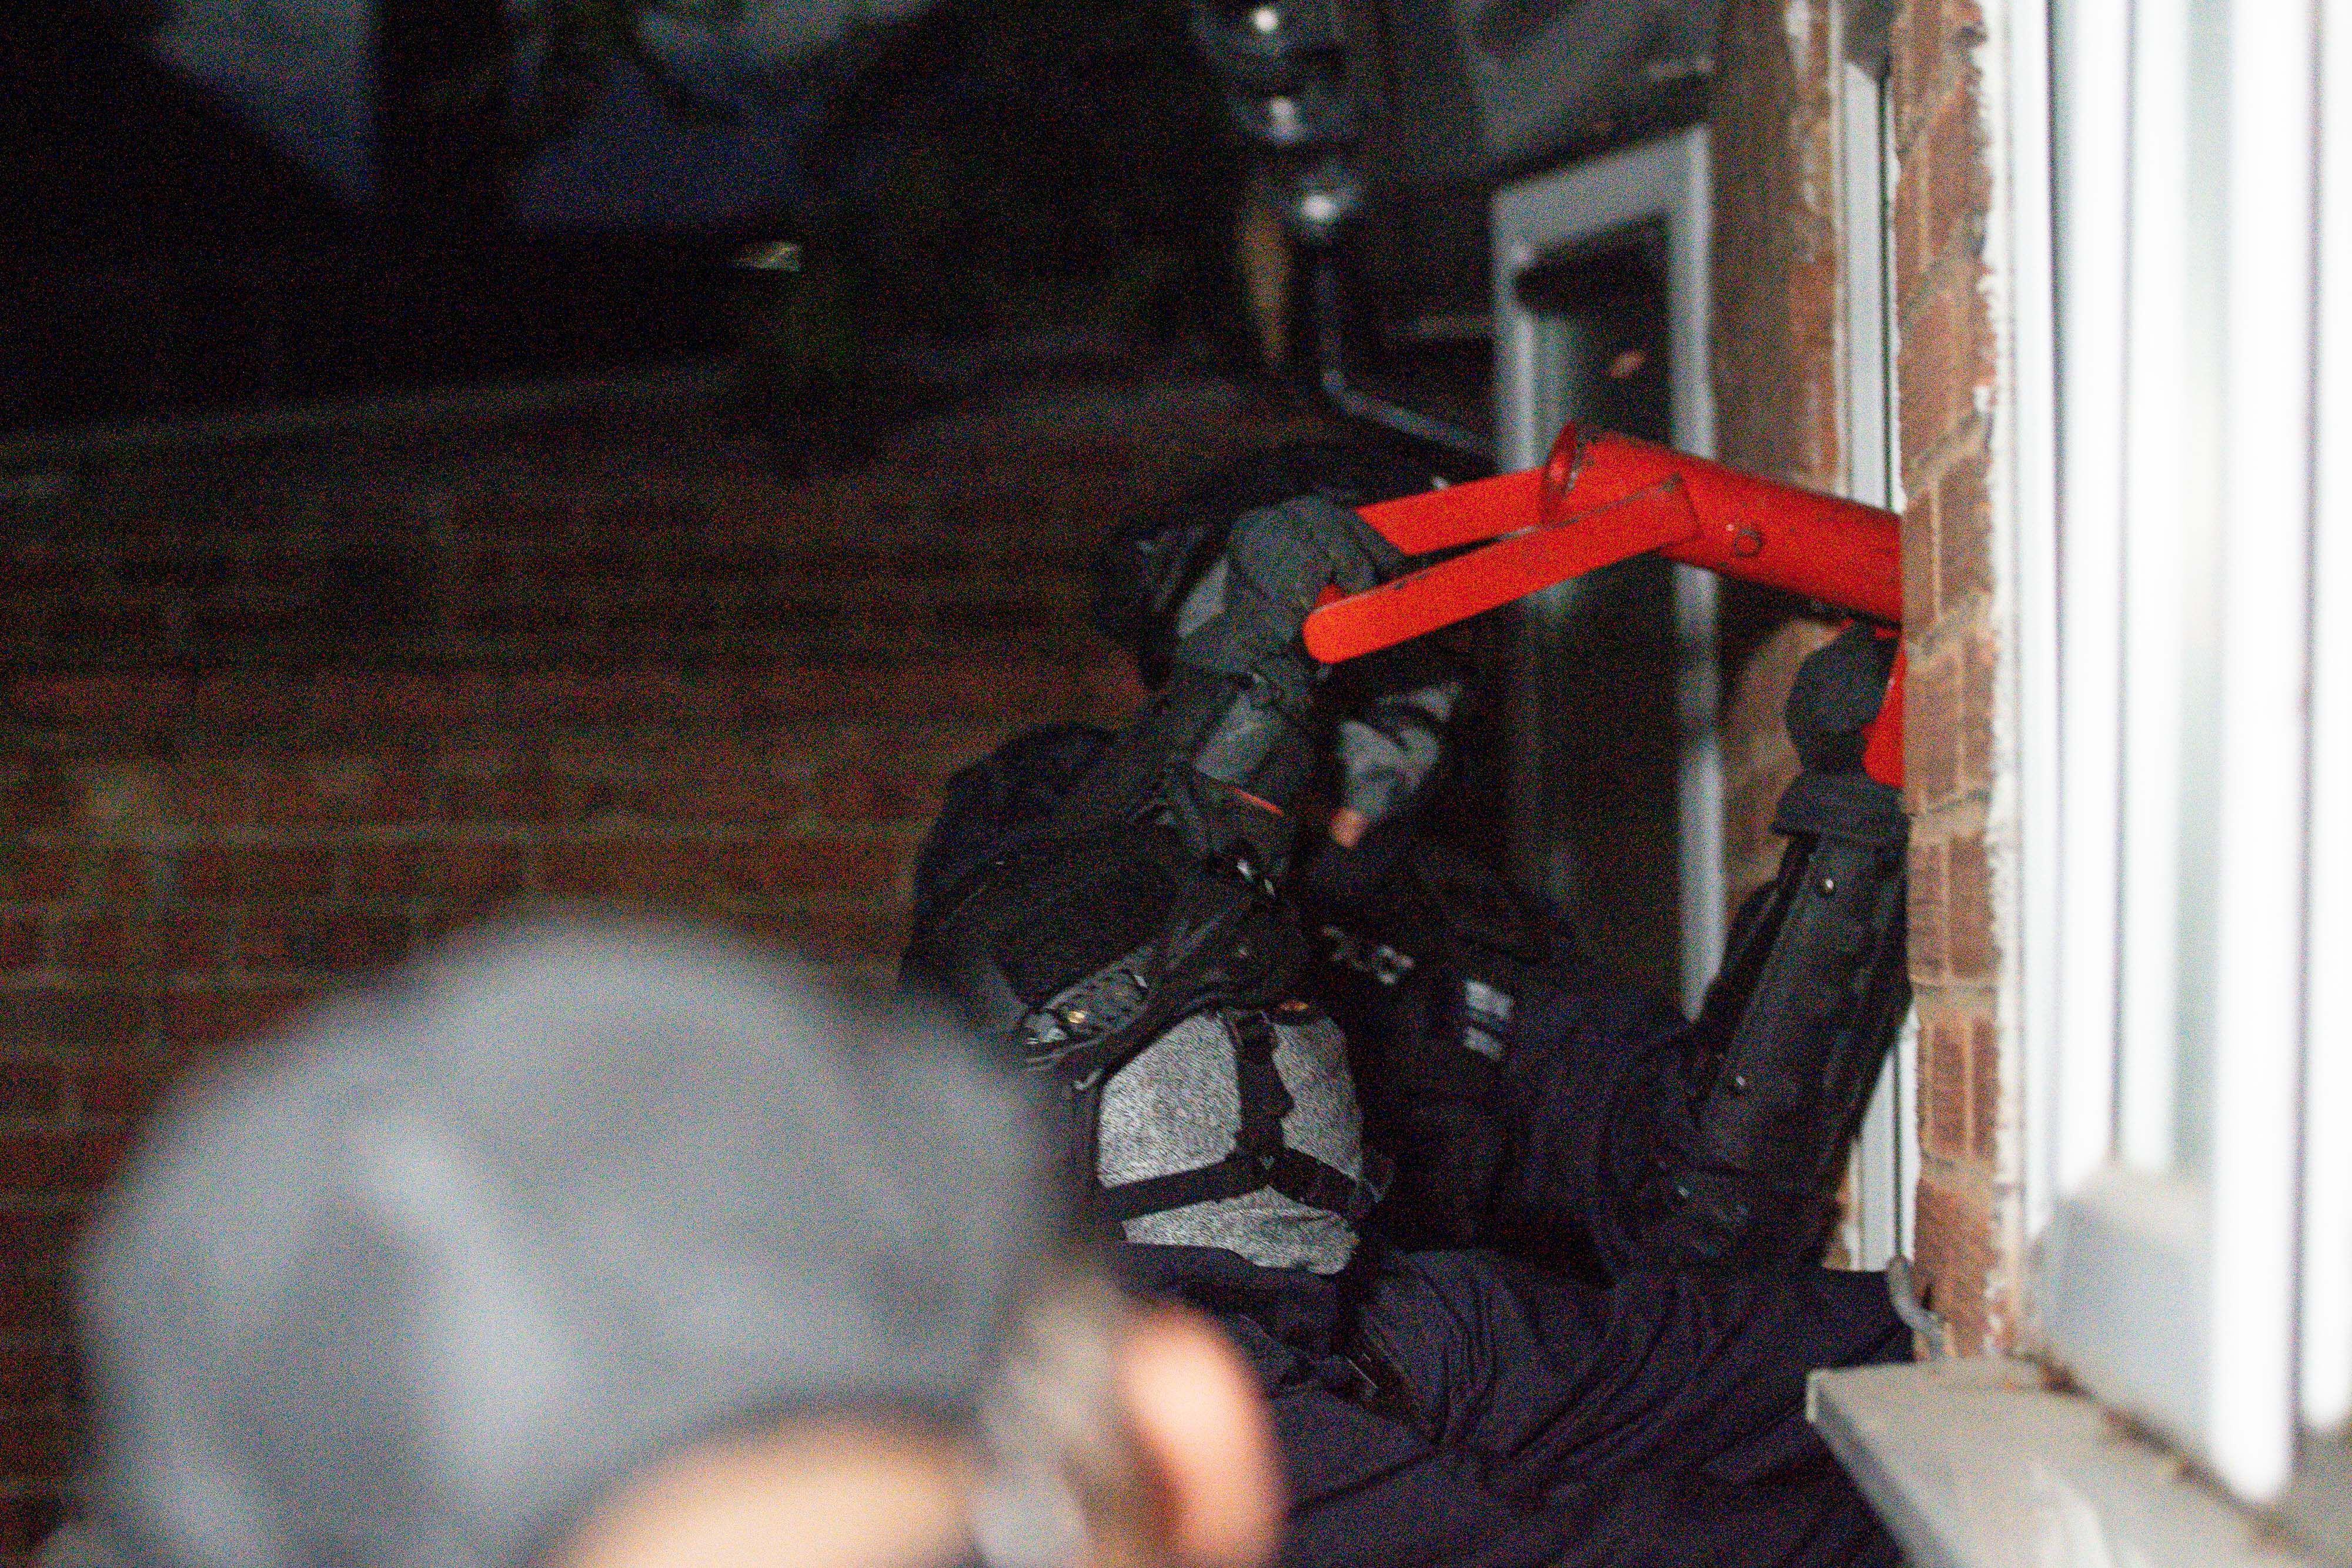 The National Crime Agency led raids across the country as part of Operation Venetic